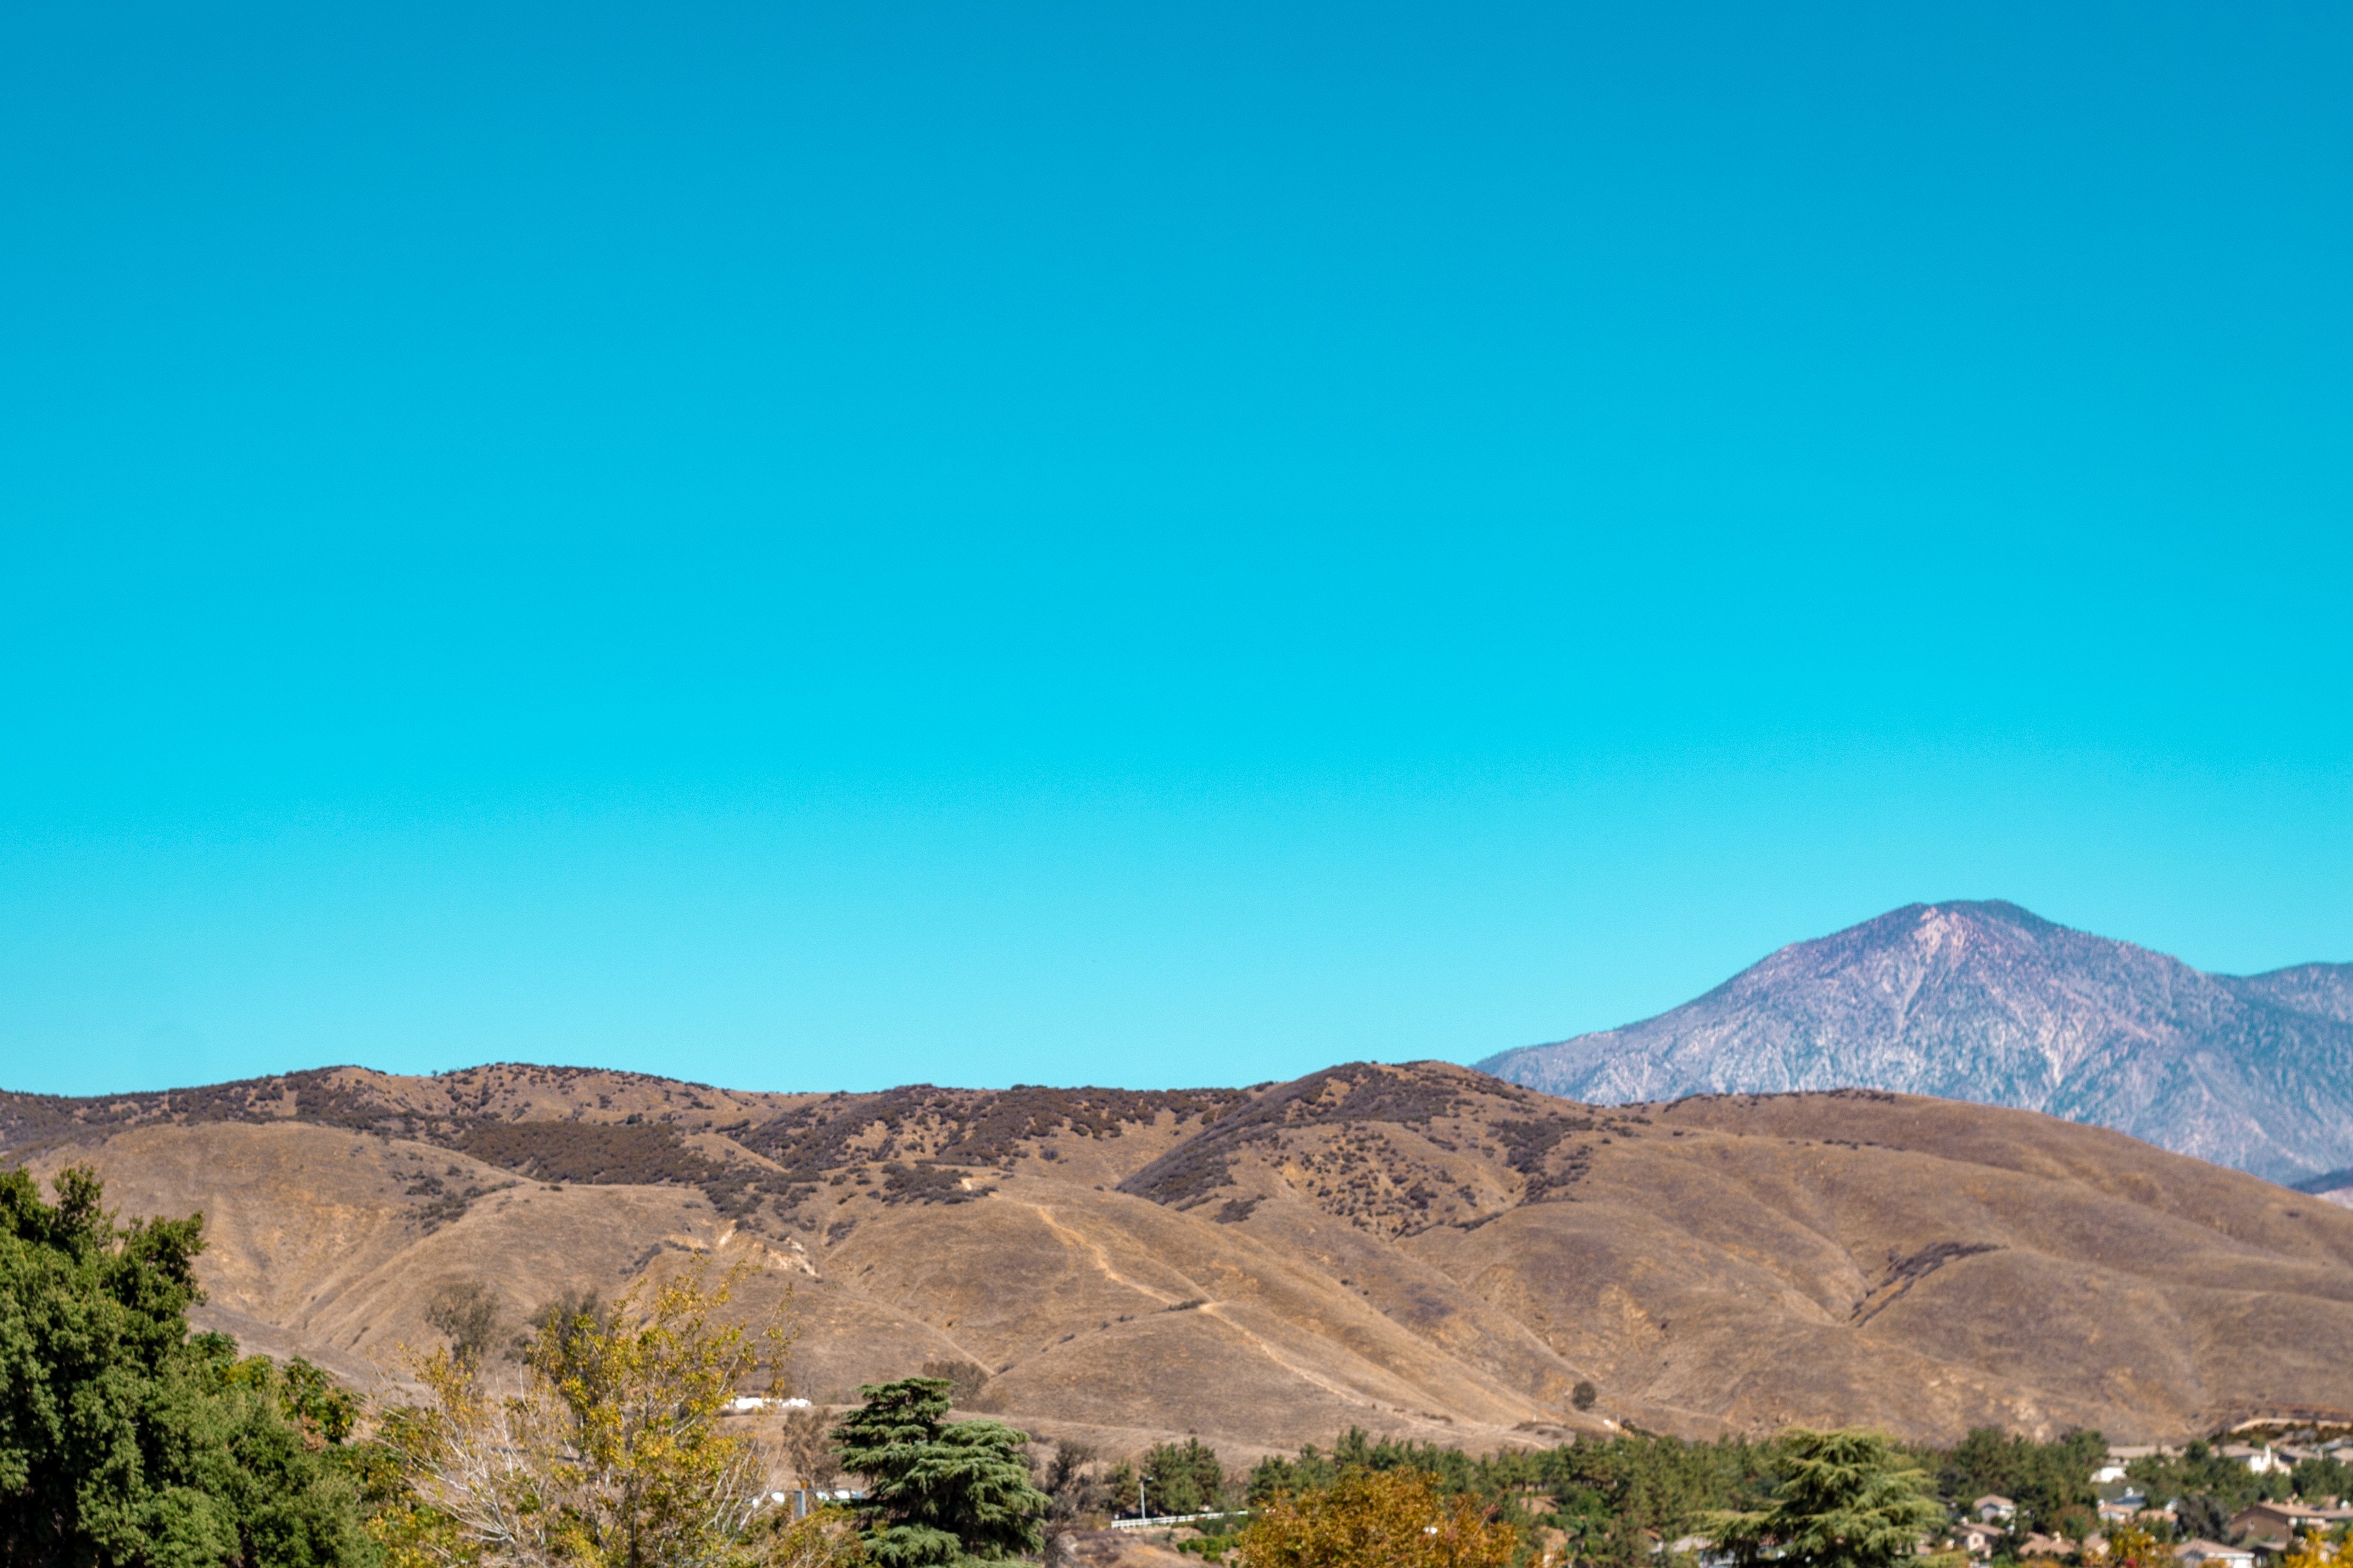 A view of the foothills of the San Bernardino Mountains in California, USA